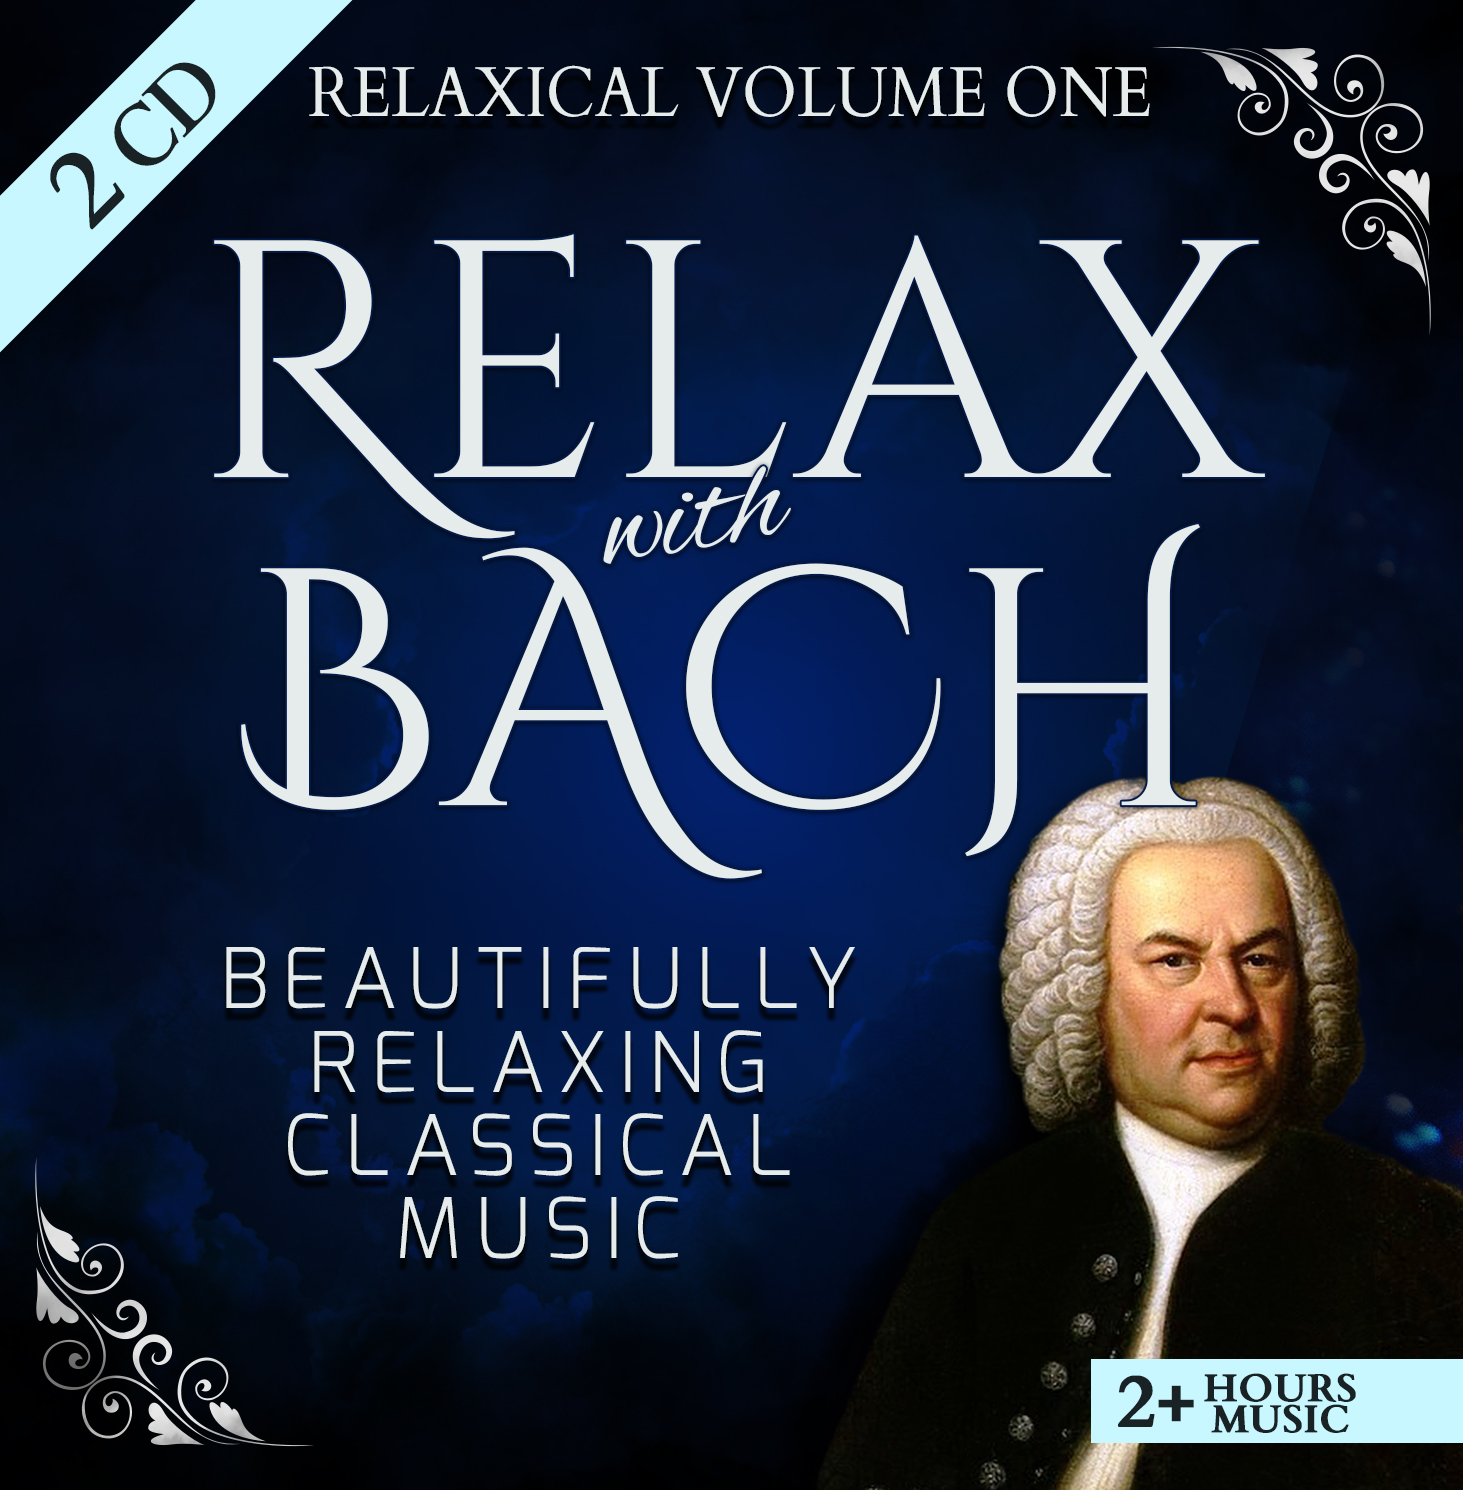 Volume 1 - Relax with Bach: Beautifully Relaxing Classical Music